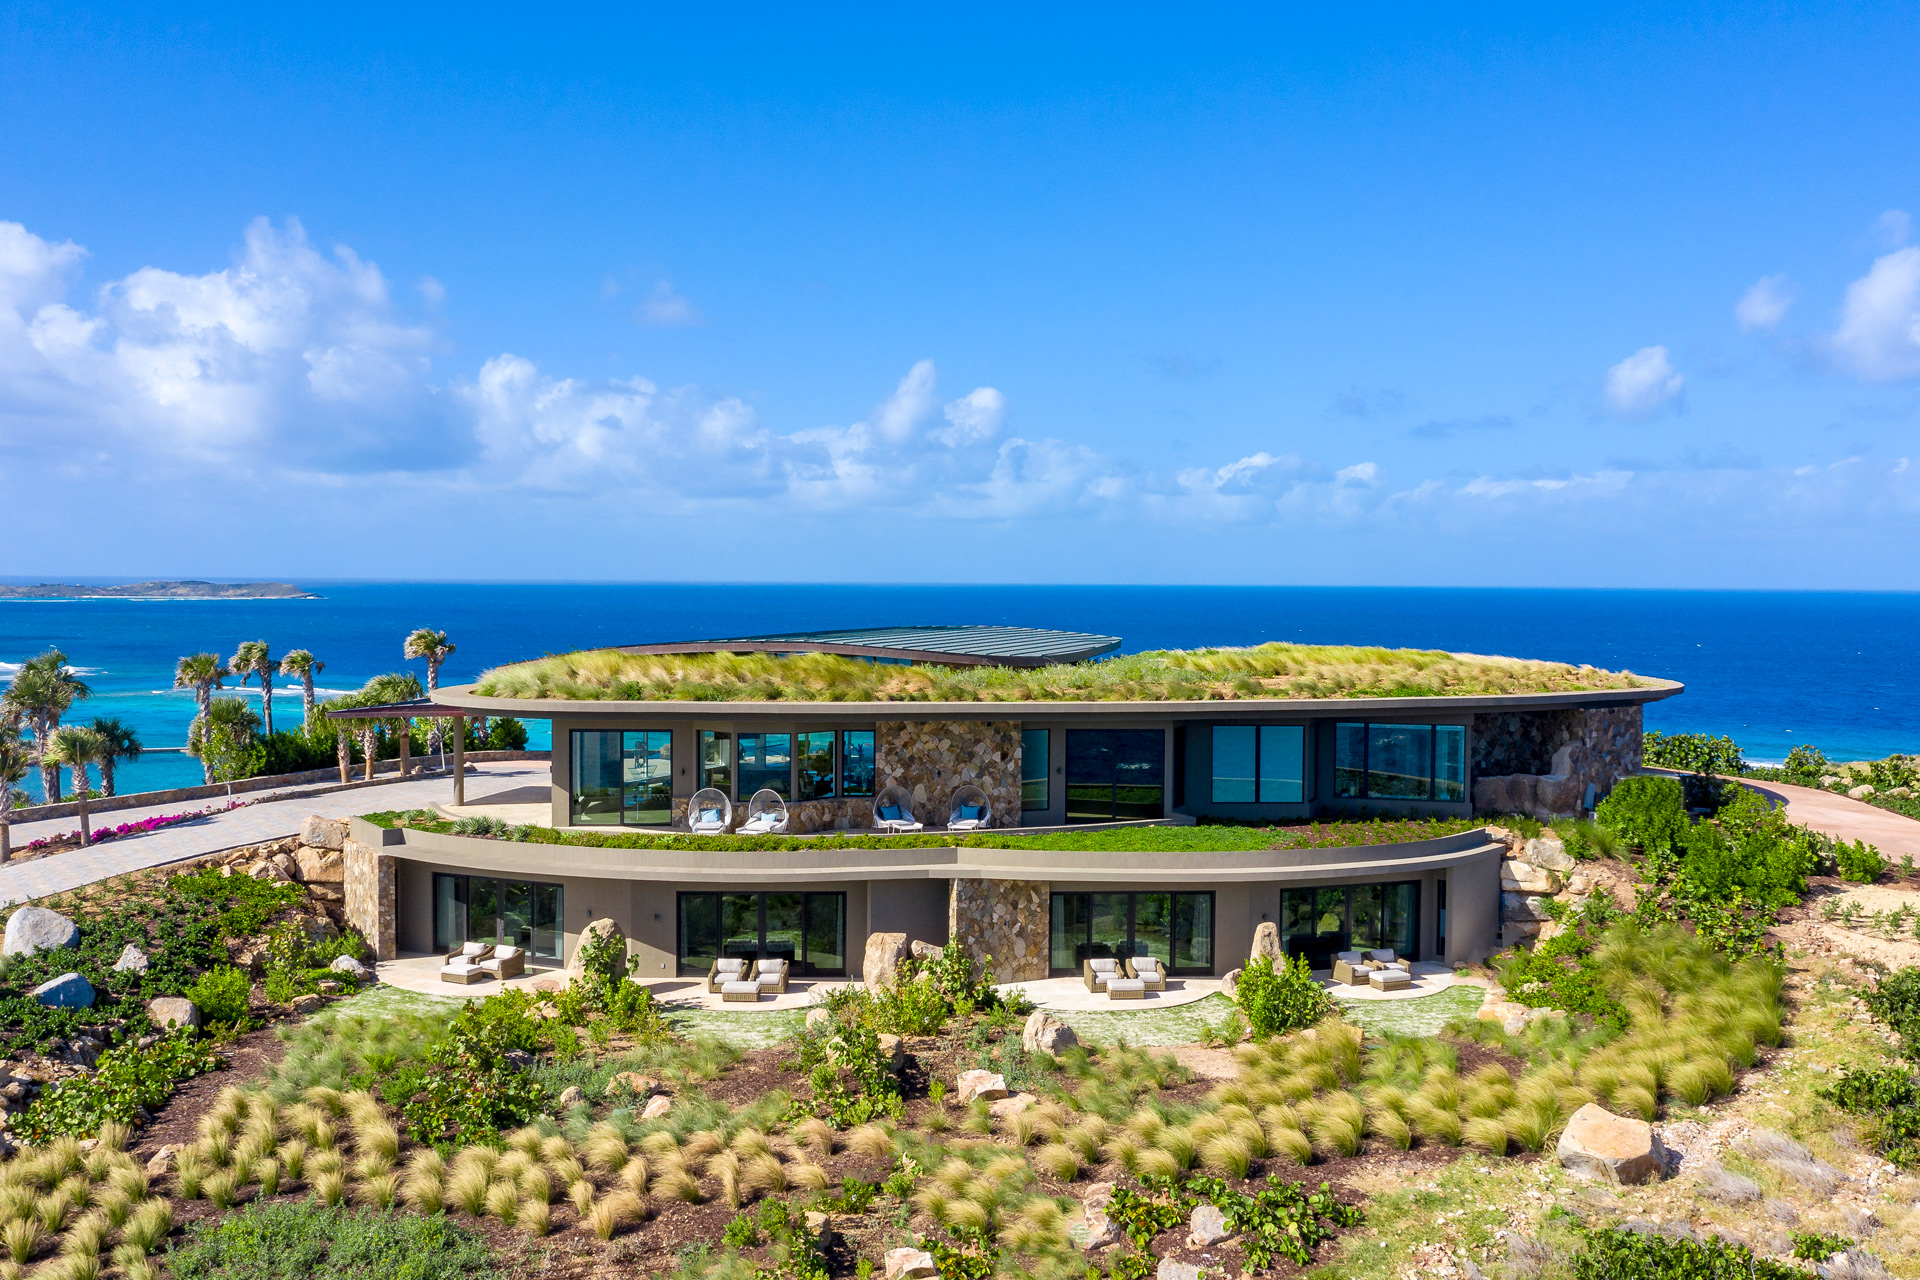 Coastal mansion with a green roof and floor-to-ceiling windows.